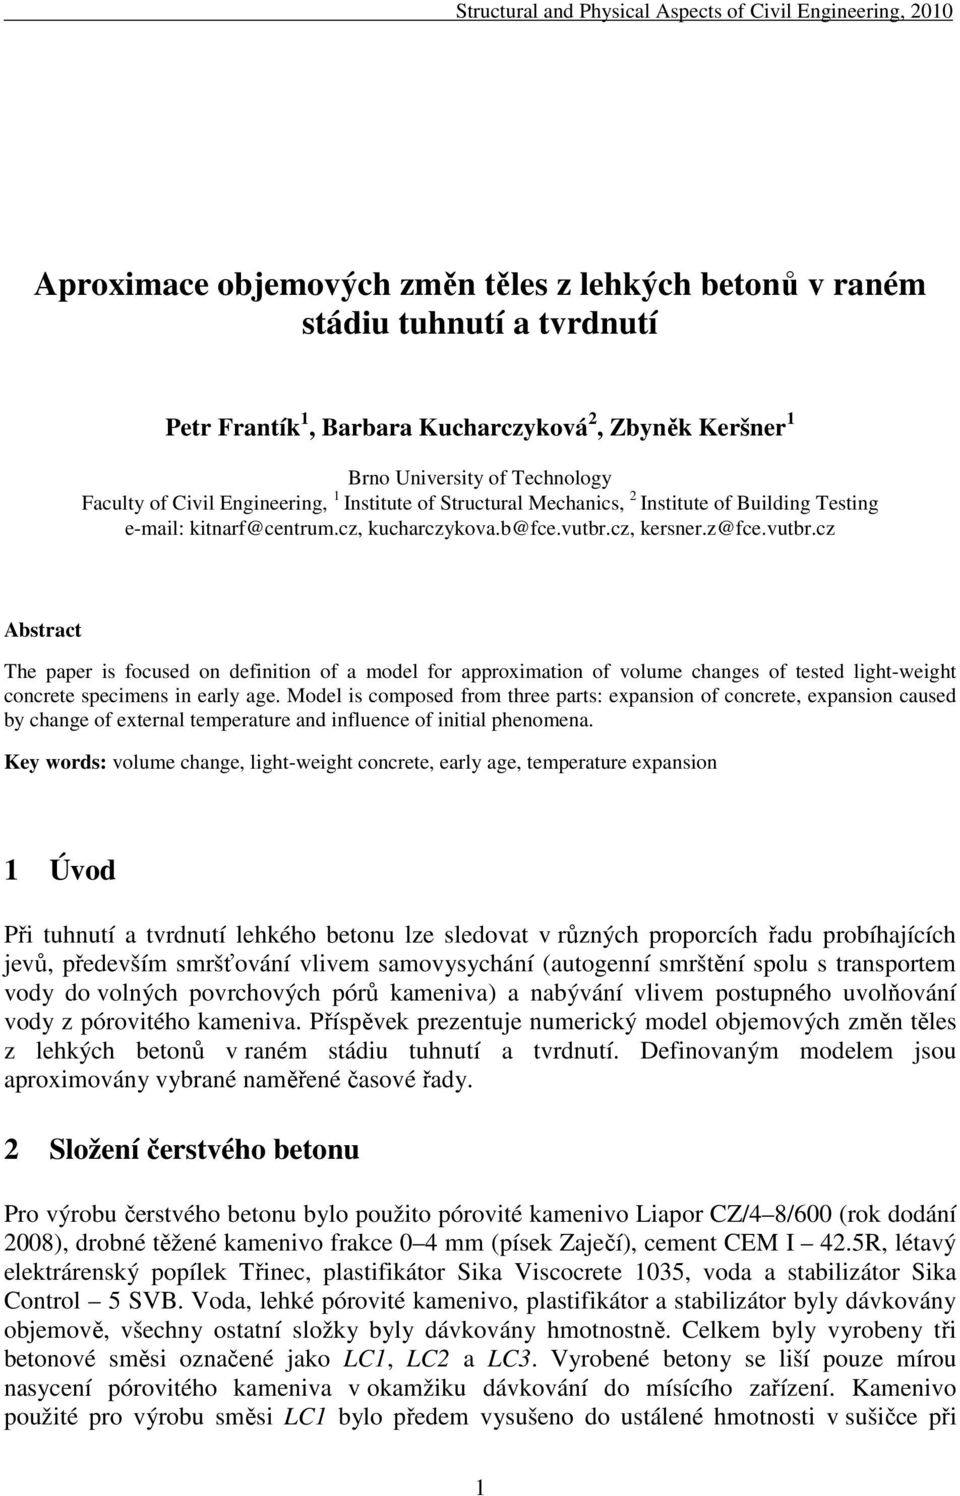 z@fce.vutbr.cz Abstract The paper is focused on definition of a model for approximation of volume changes of tested light-weight concrete specimens in early age.